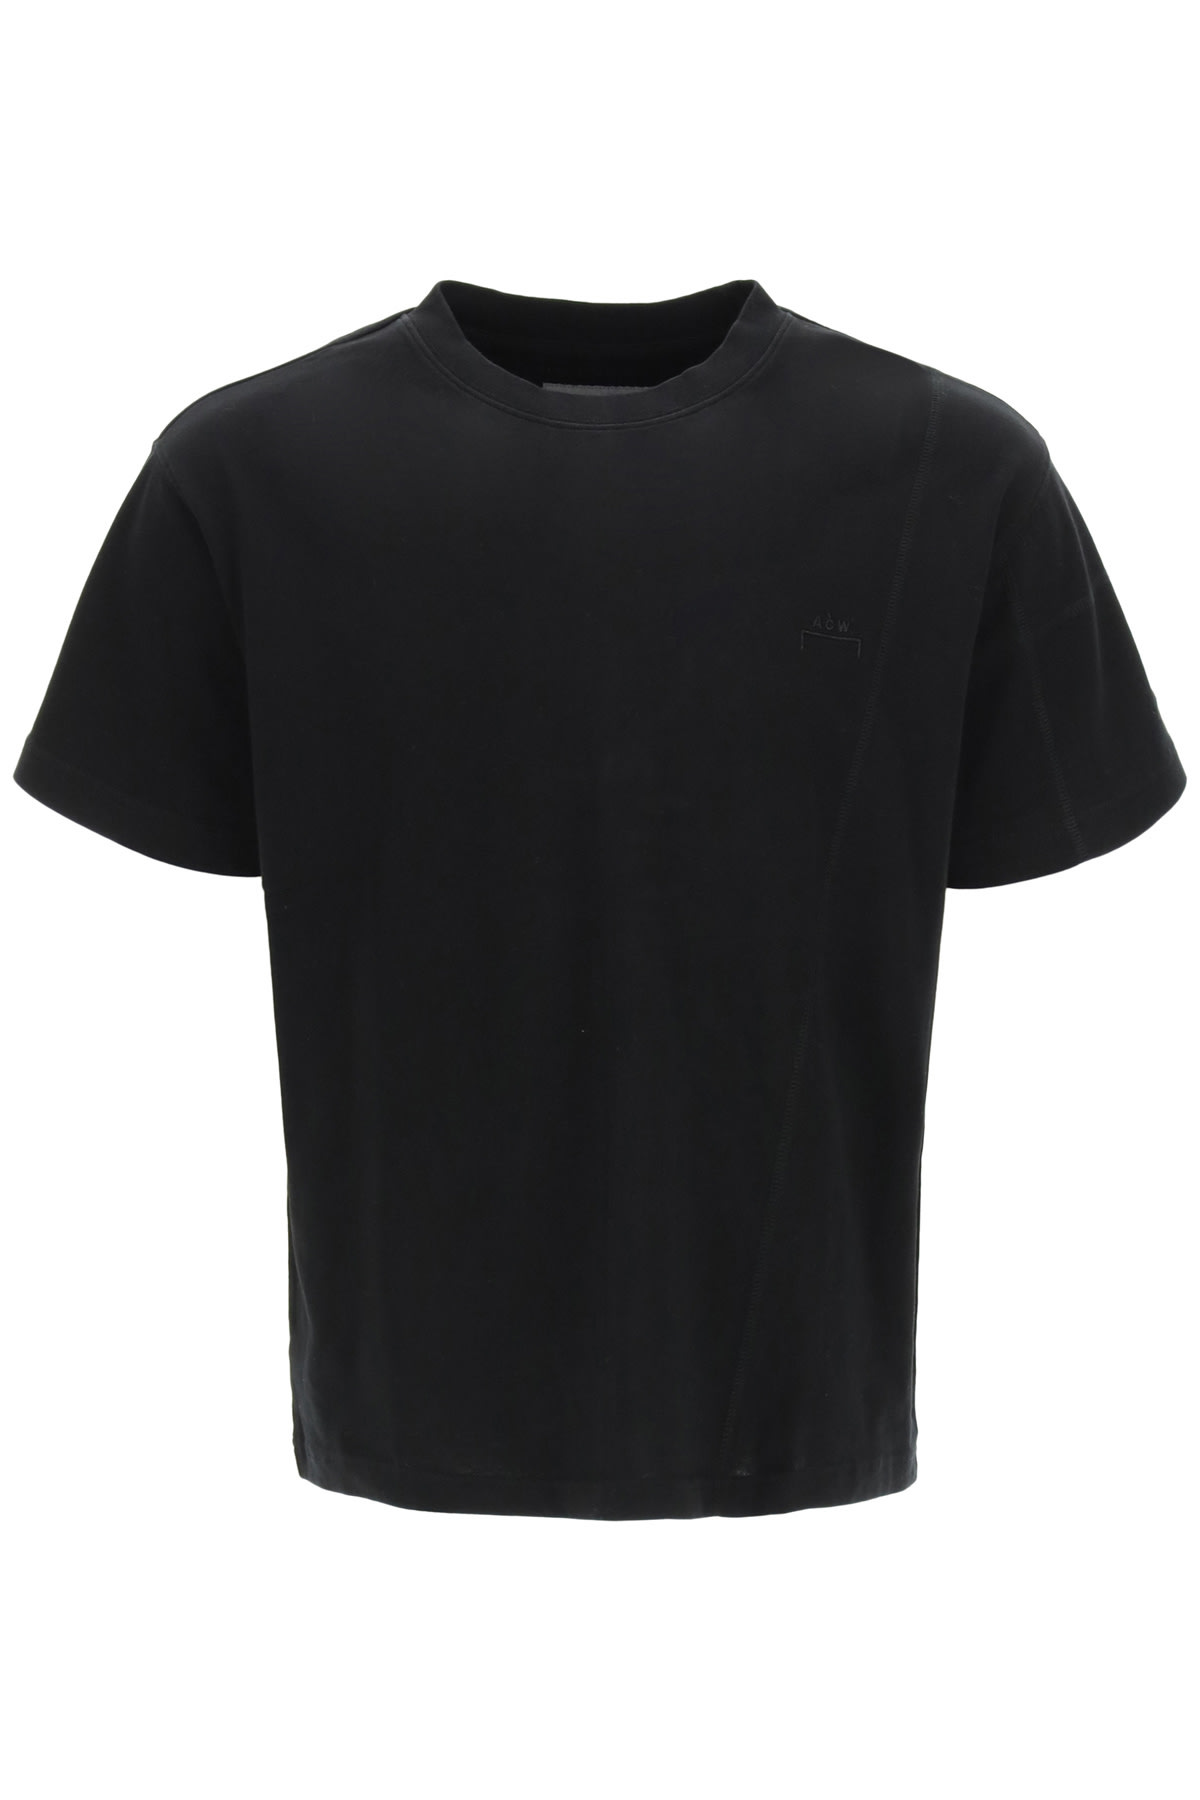 A-COLD-WALL* ESSENTIAL T-SHIRT WITH LOGO EMBROIDERY,ACWMTS029 BLACK